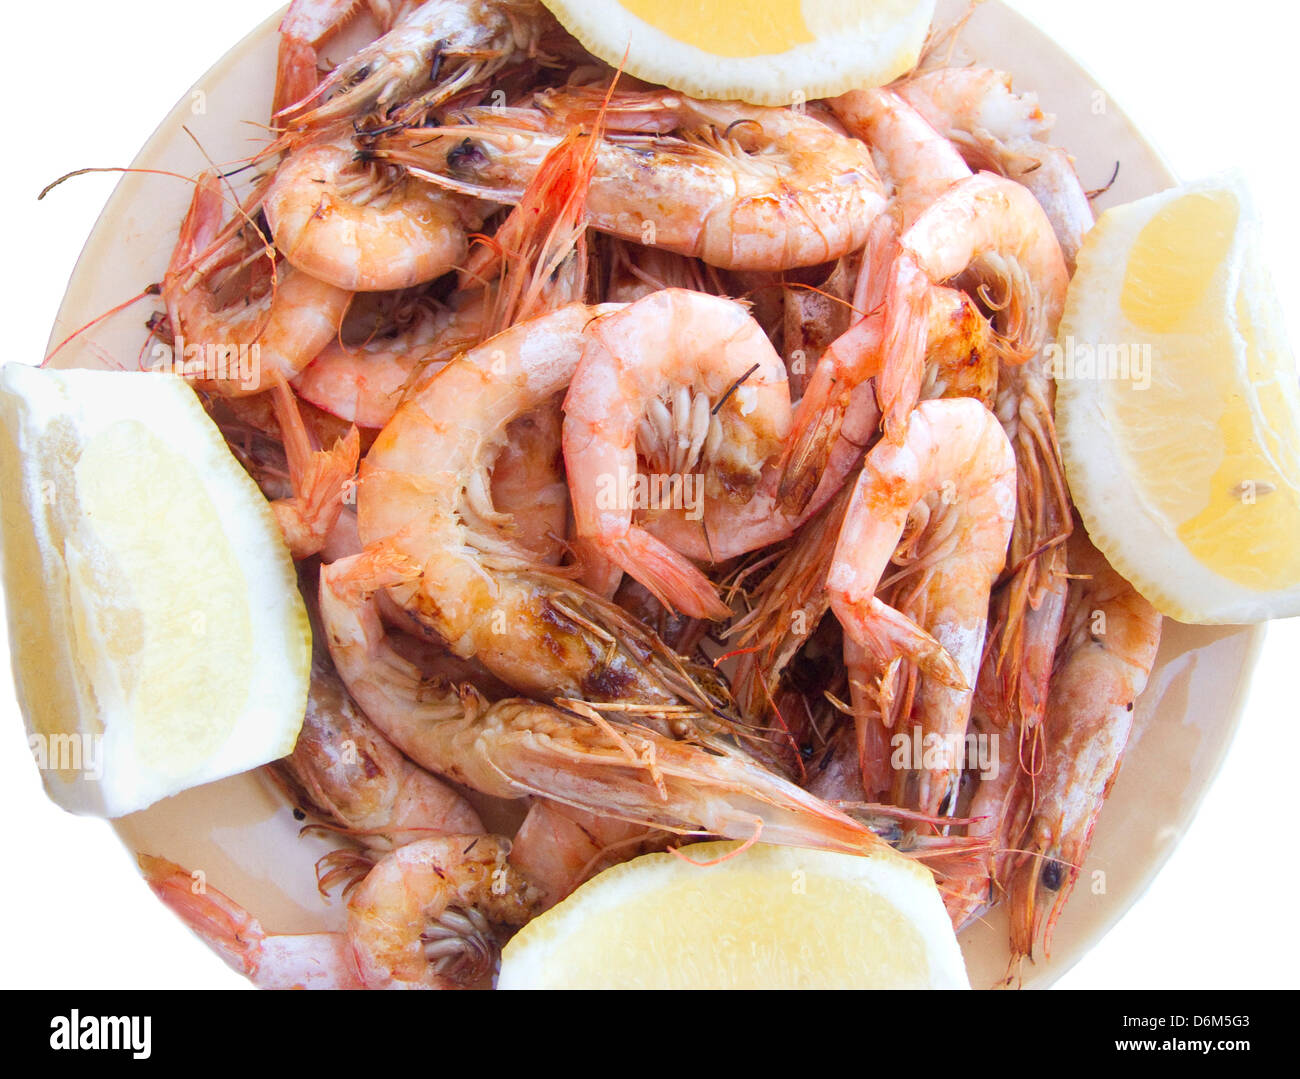 Plate of freshly grilled shrimp in the shell, with lemon wedges Stock Photo